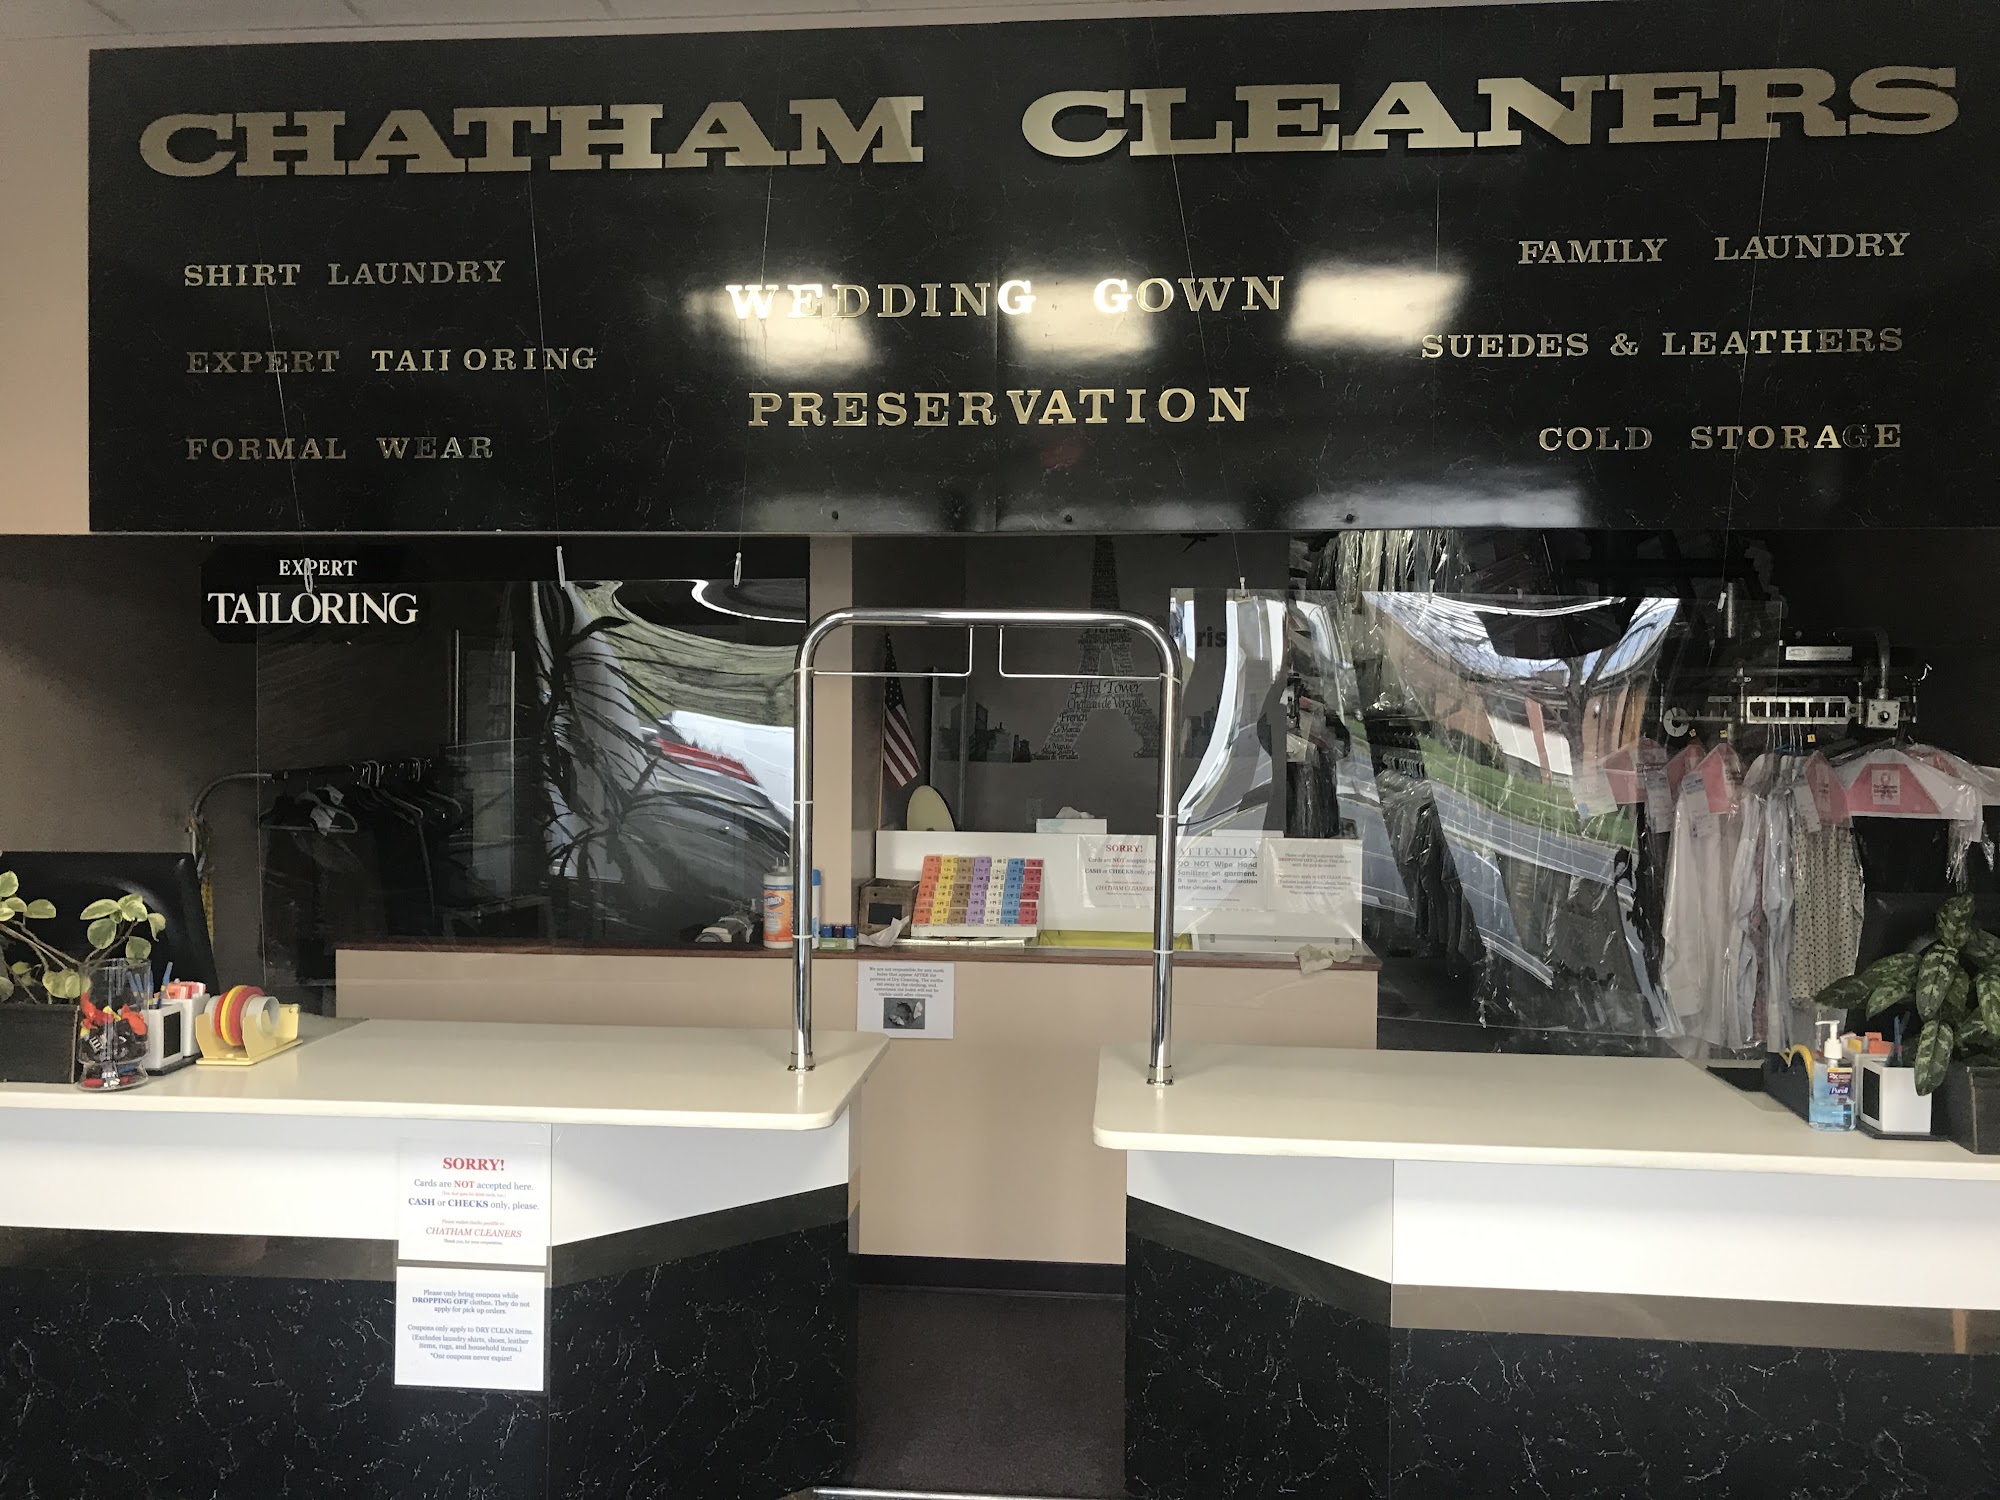 Chatham Cleaners